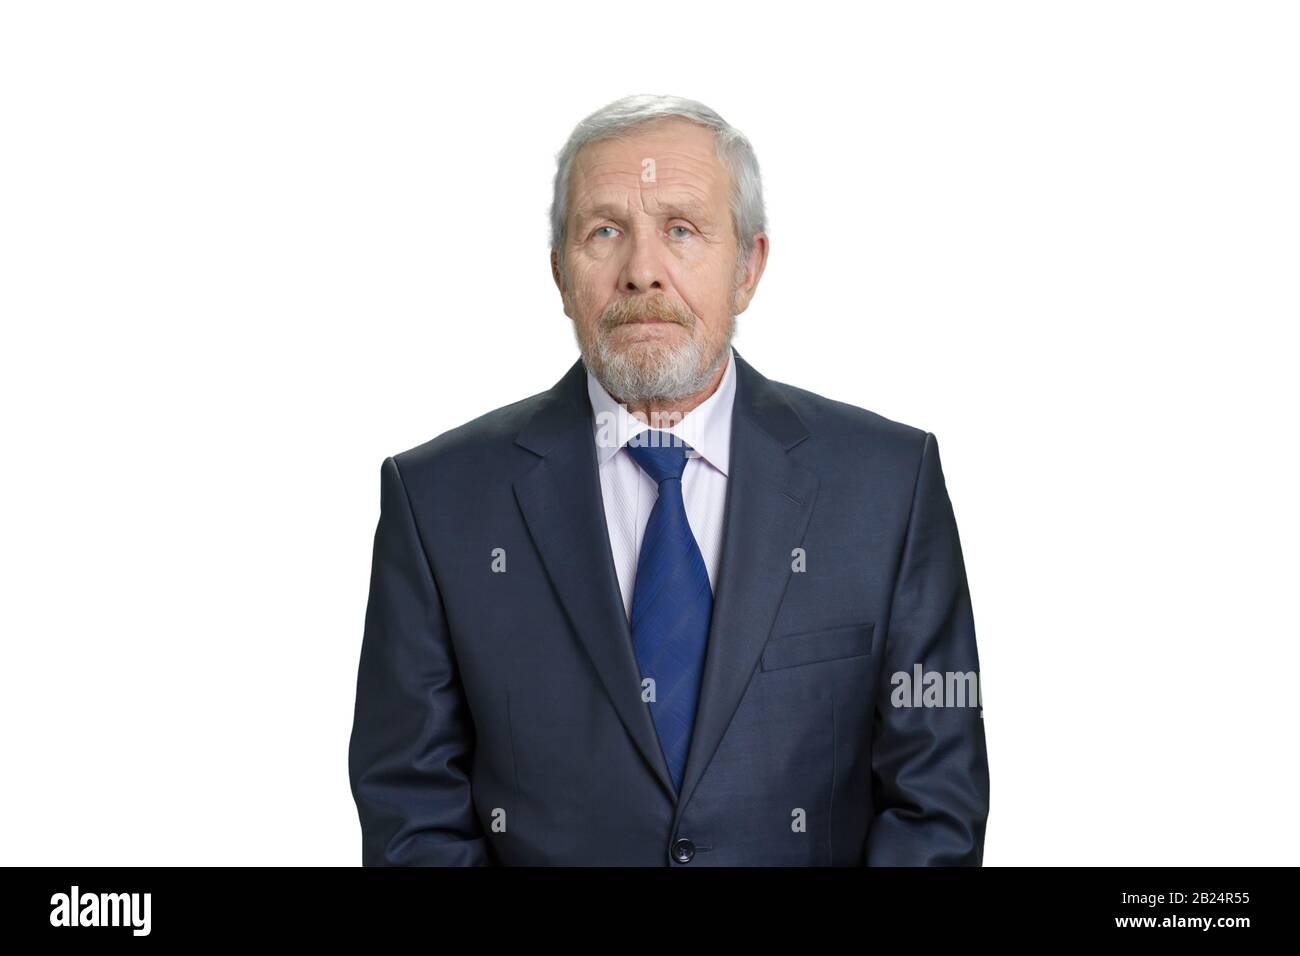 Portrait of old senior man in business suit. Stock Photo